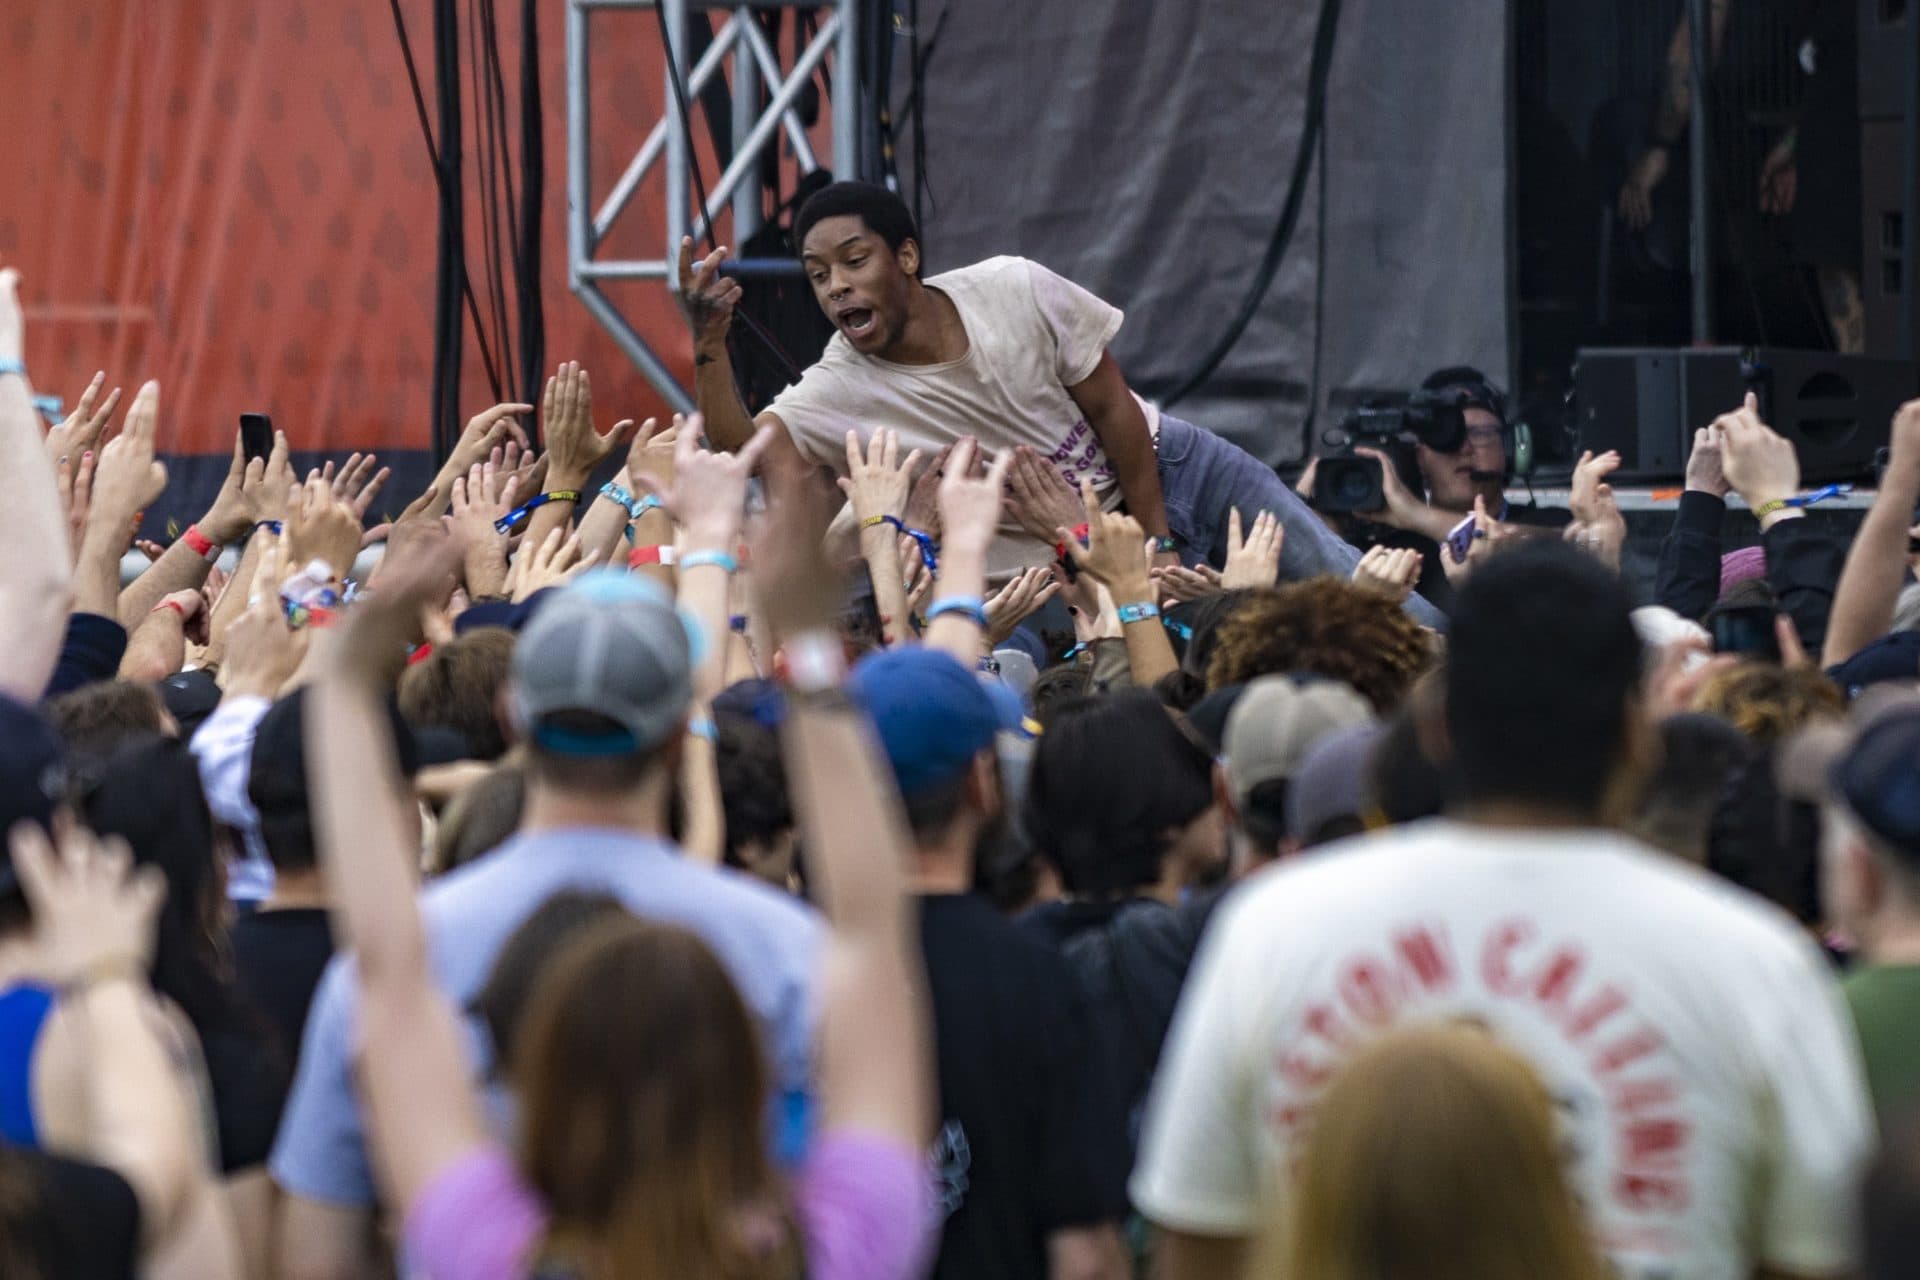 KennyHoopla dives into the crowd during his set at the Boston Calling Music Festival. (Jesse Costa/WBUR)